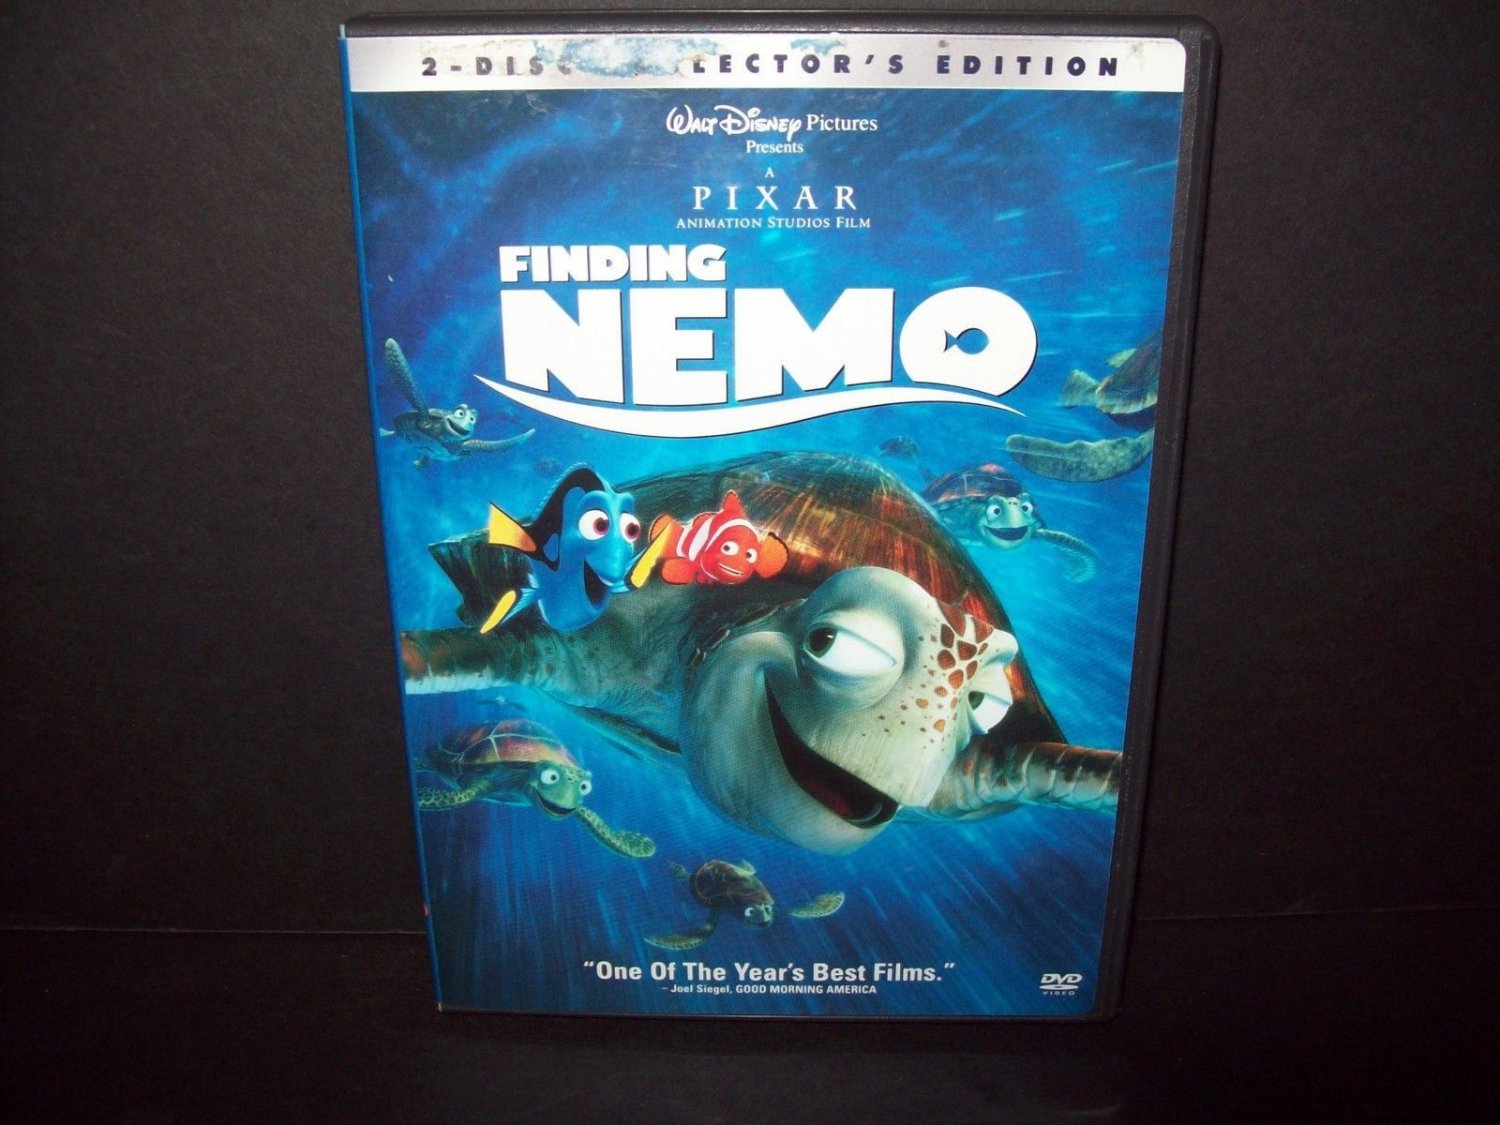 Finding Nemo - DVD - 2 Disc Collector's Edition - ORIGINAL AUTHENTIC ...